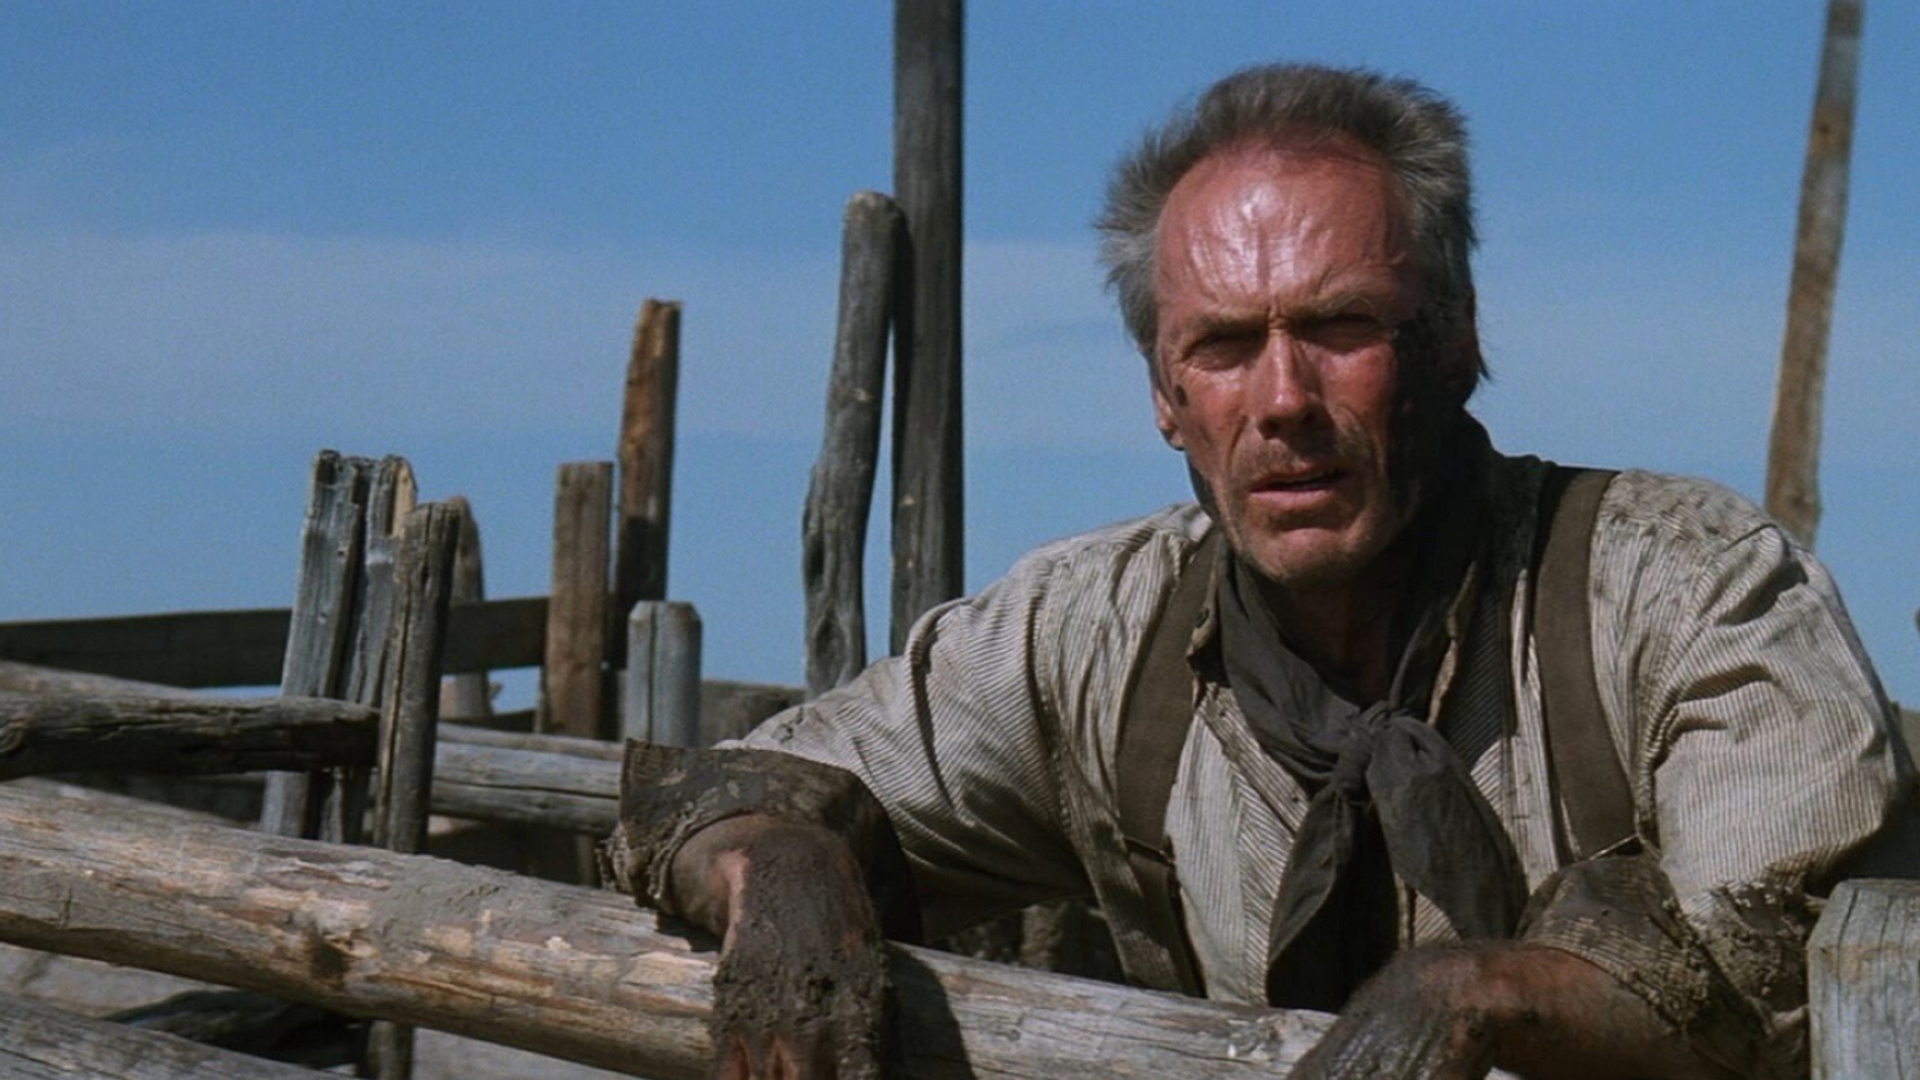 Clint Eastwood: Unforgiven, "Best Picture" Academy Award, Sergio Leone And Don Siegel. 1920x1080 Full HD Wallpaper.